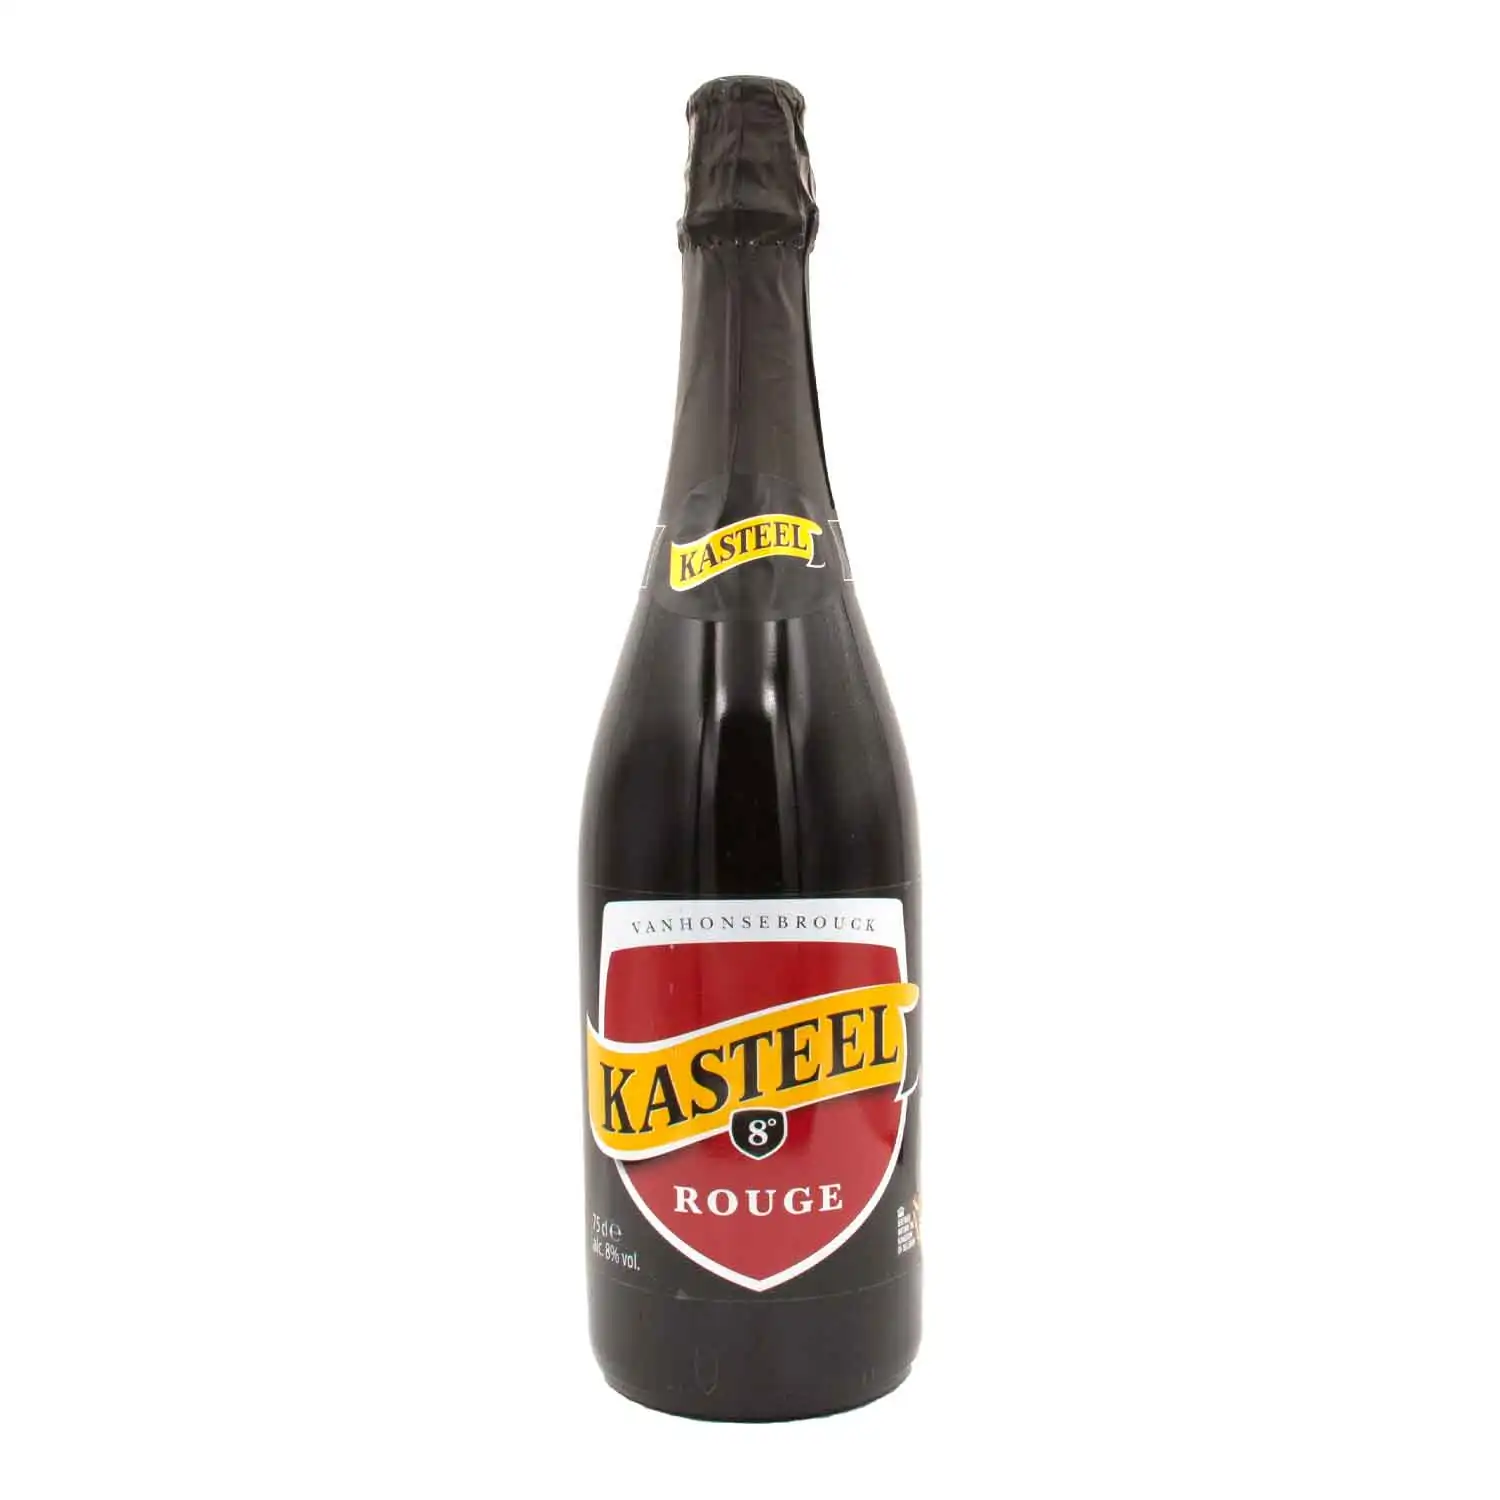 Kasteel rouge 75cl Alc 8% - Buy at Real Tobacco